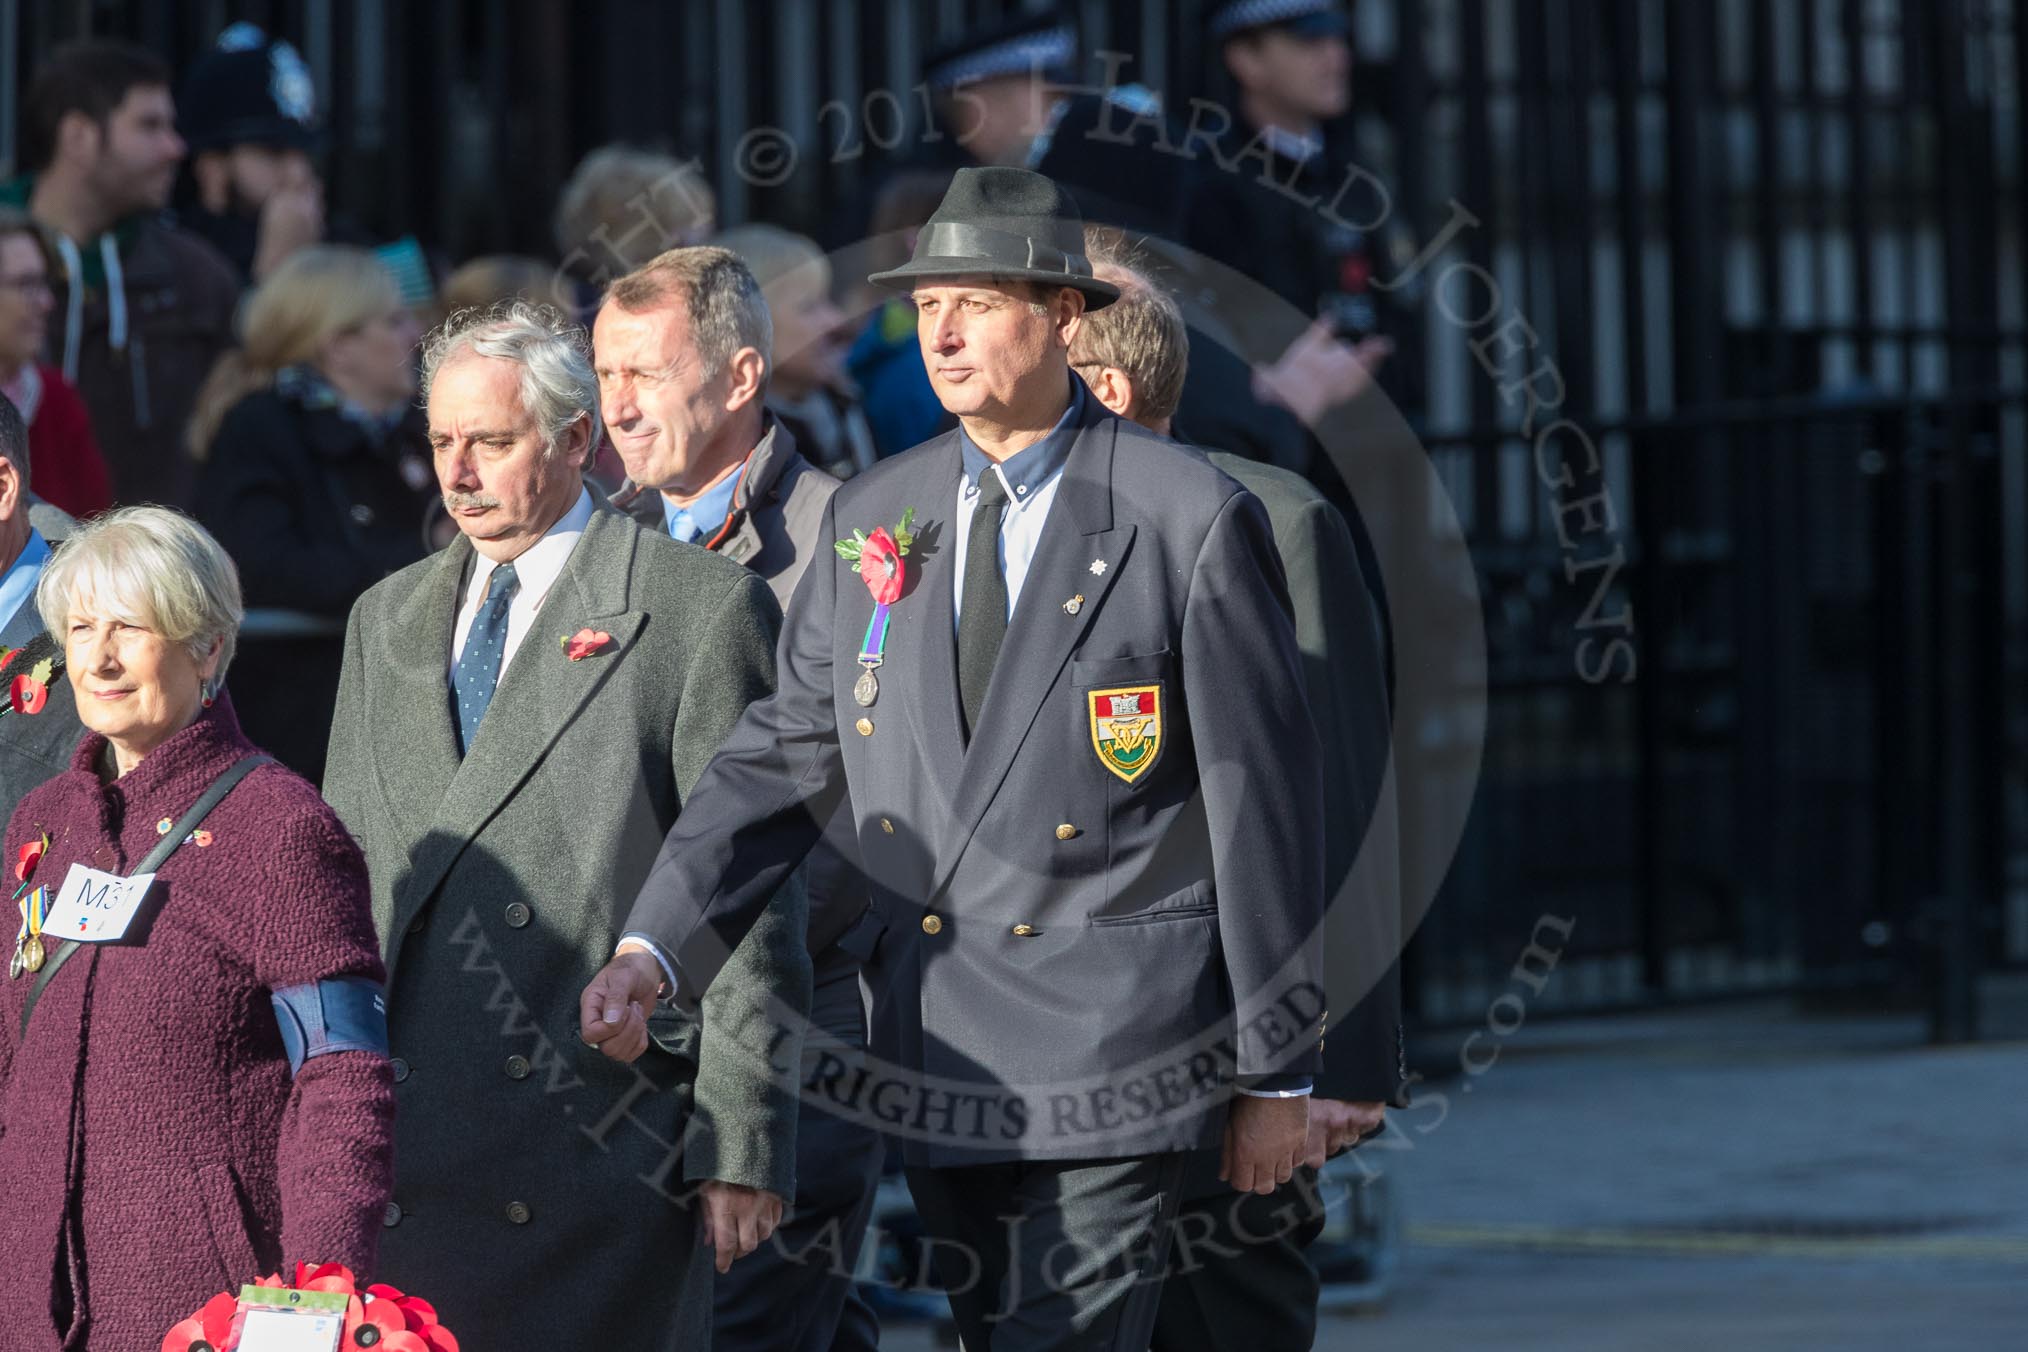 March Past, Remembrance Sunday at the Cenotaph 2016: M31 Romany & Traveller Society.
Cenotaph, Whitehall, London SW1,
London,
Greater London,
United Kingdom,
on 13 November 2016 at 13:17, image #2780